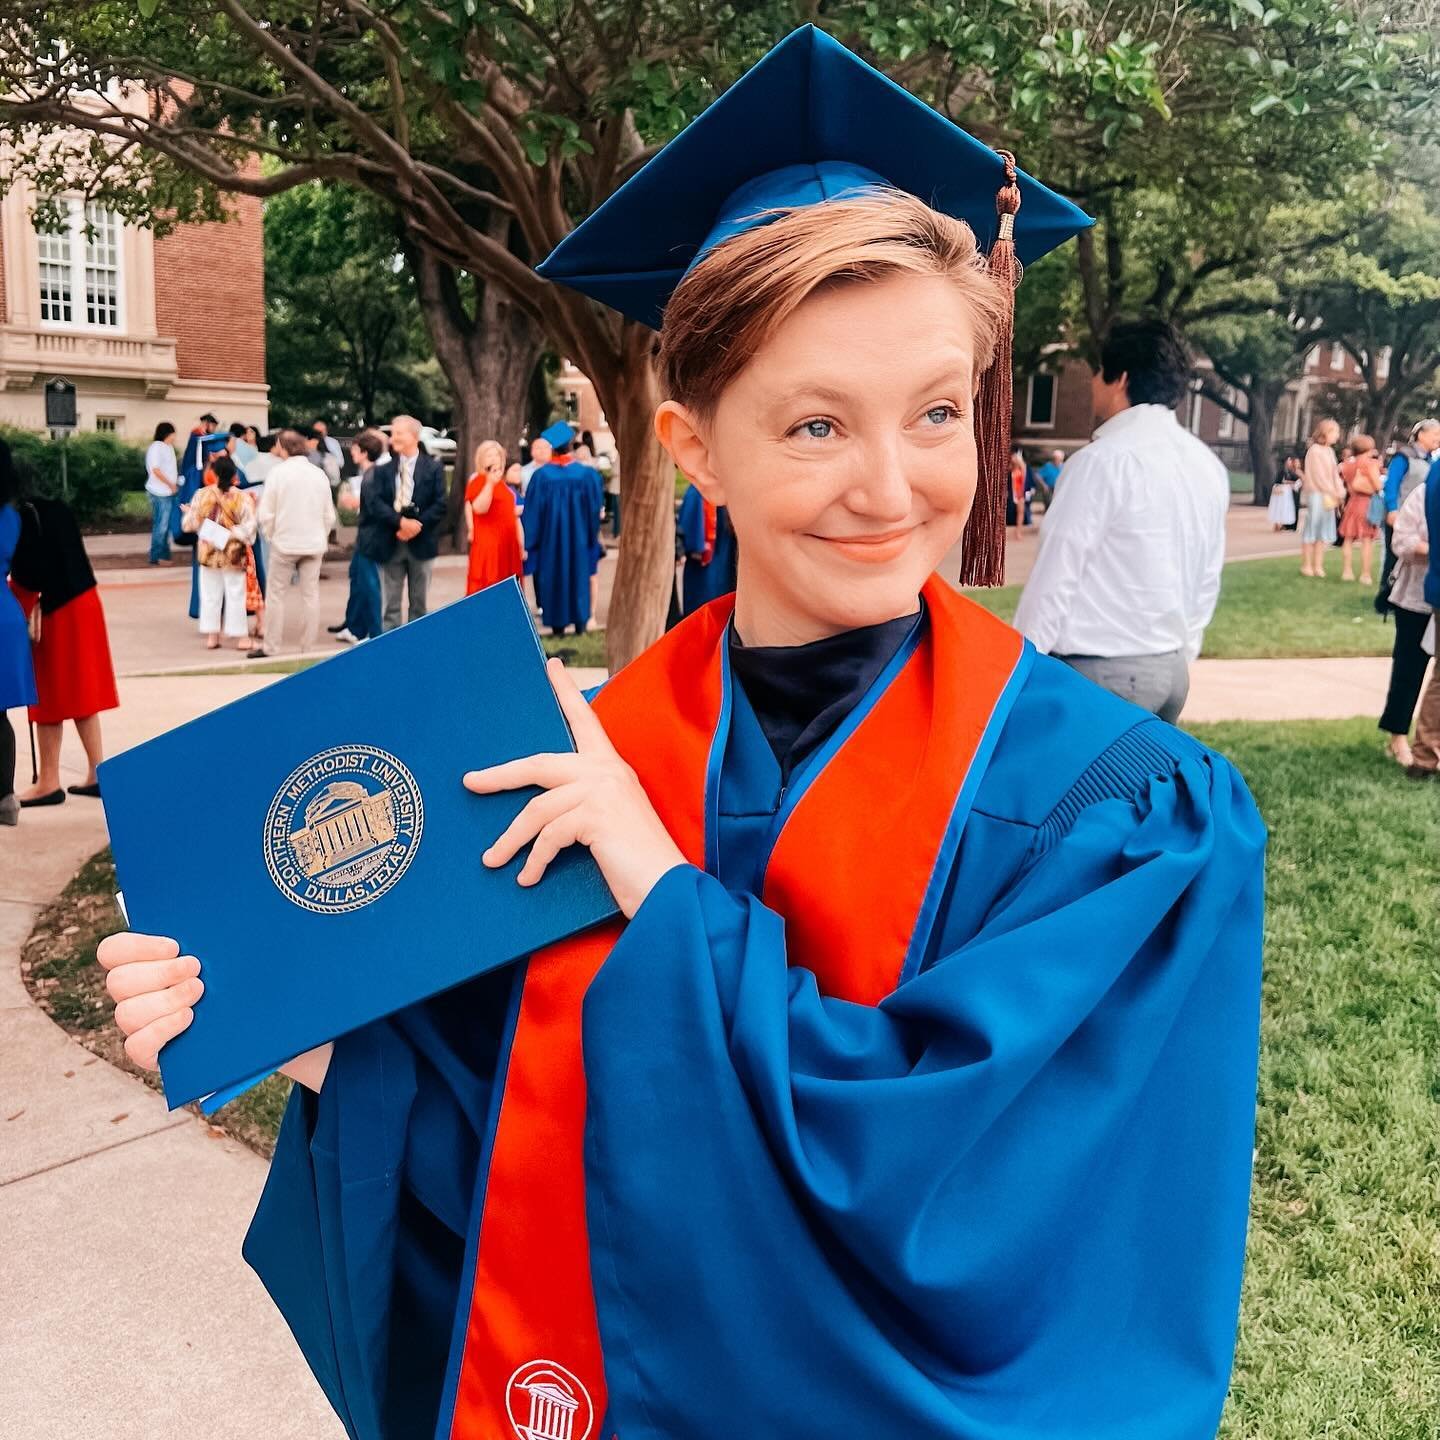 Congratulations to our dearest graduate, @morgan__draper who has brought endless amounts of joy, wisdom, and good humor to our community. We are so proud of you! Know that this will always be home. 

We are so grateful for the leadership of our co-pr